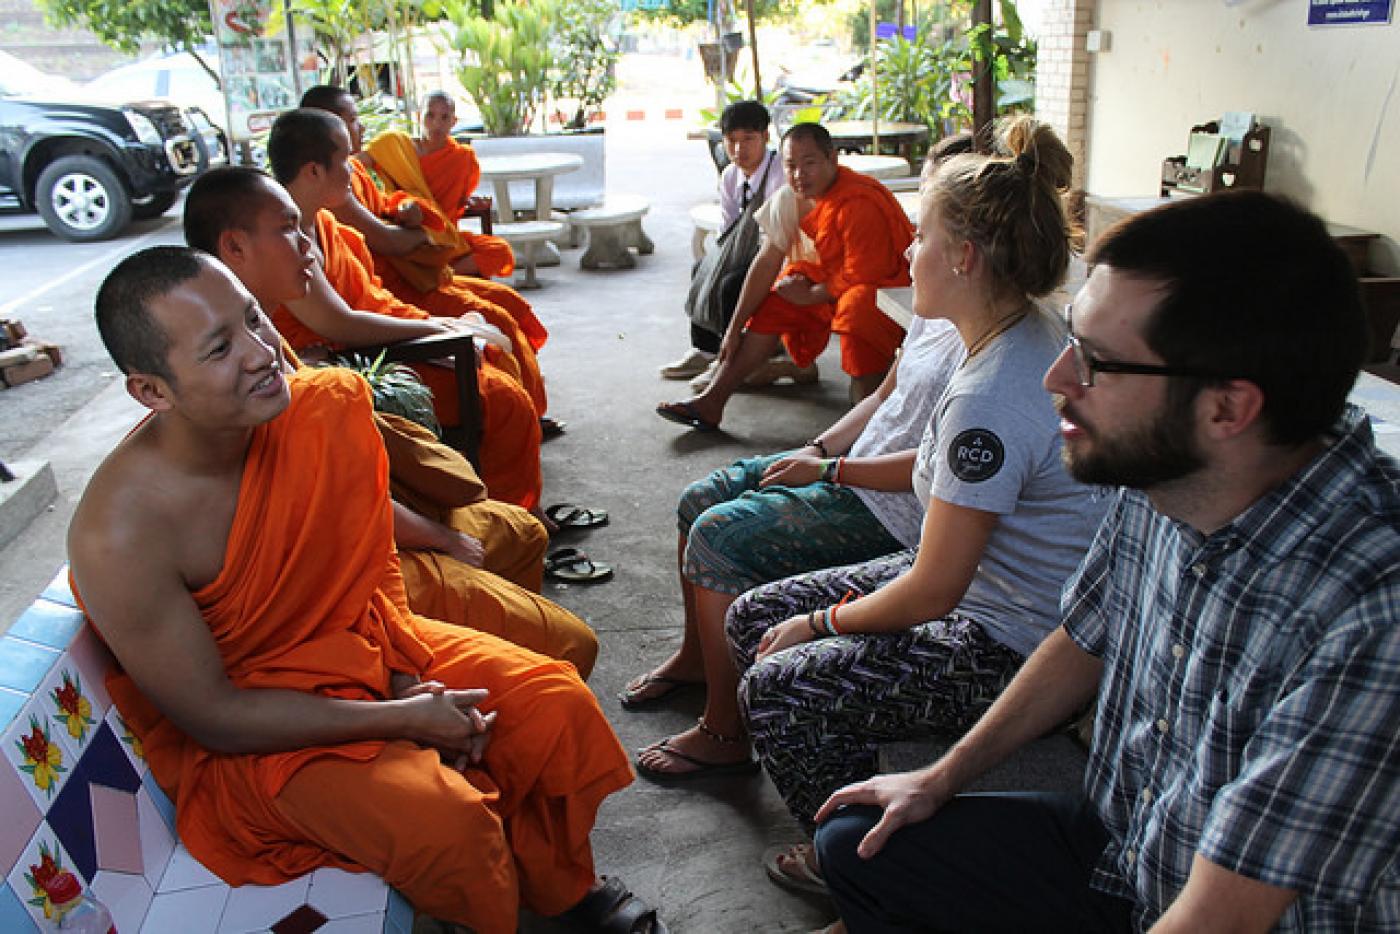 A monk chat taking place in Thailand. 